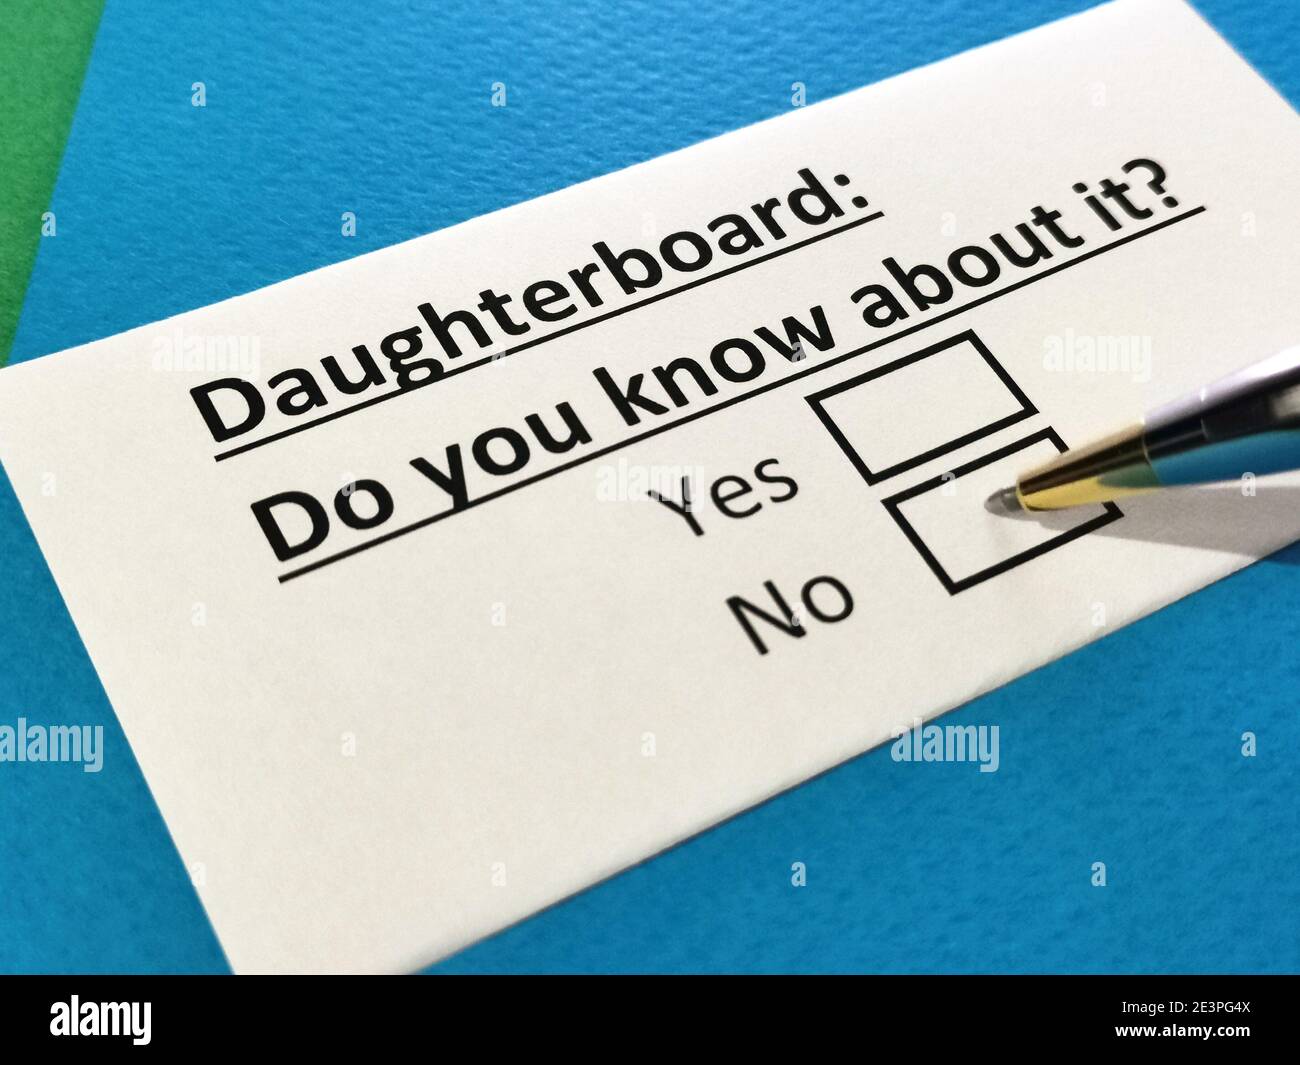 One person is answering question about daughterboard. Stock Photo